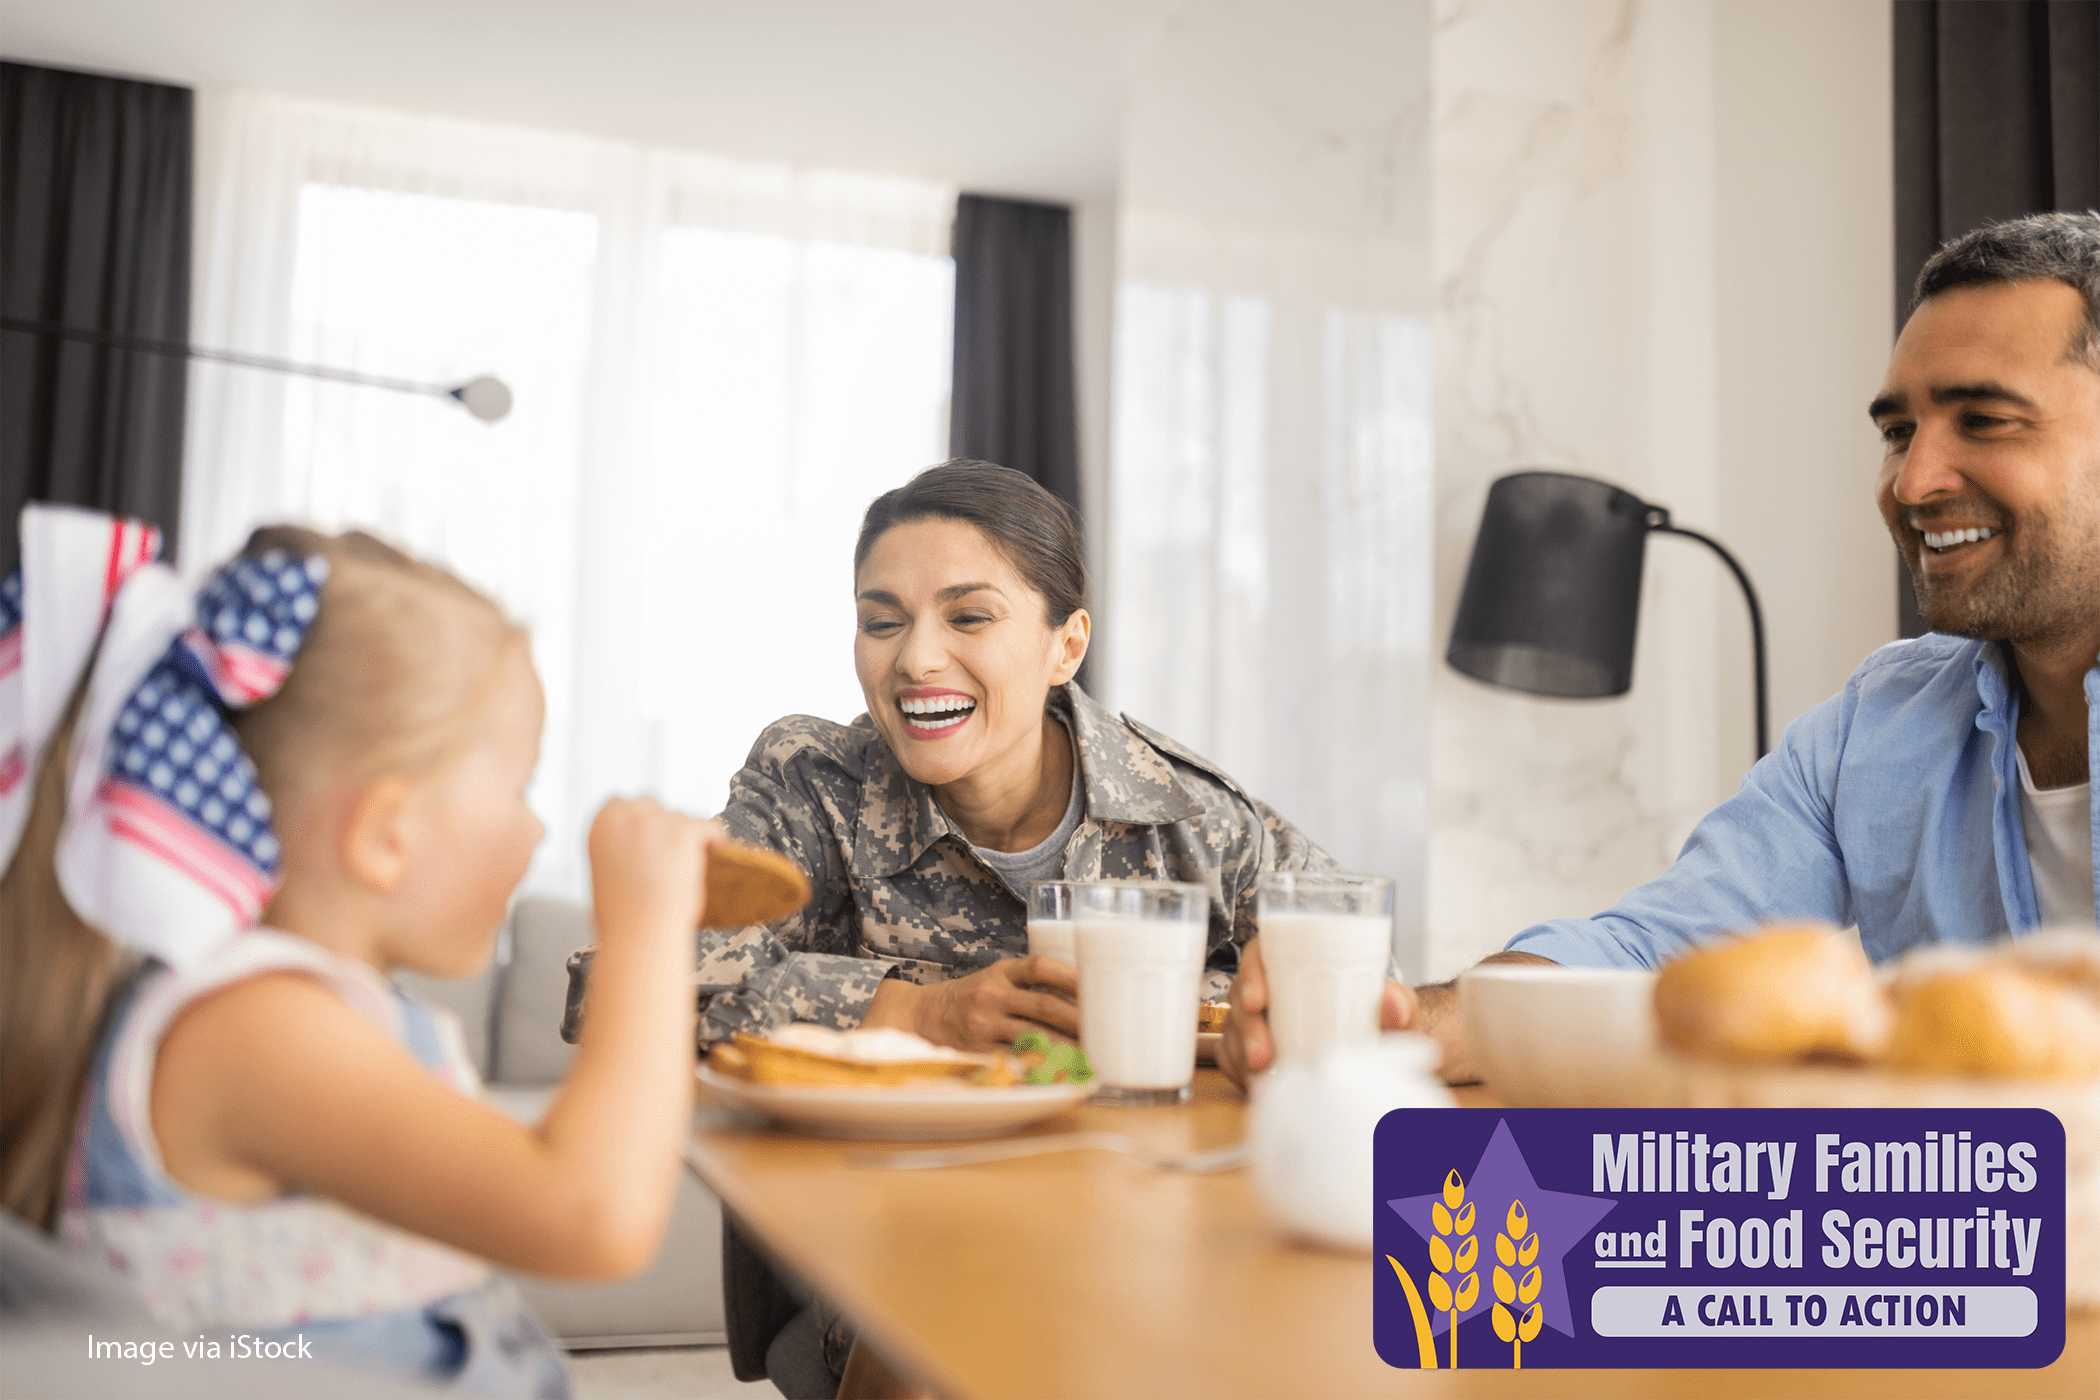 Family sitting at table having a meal, with woman dressed in military fatigues.